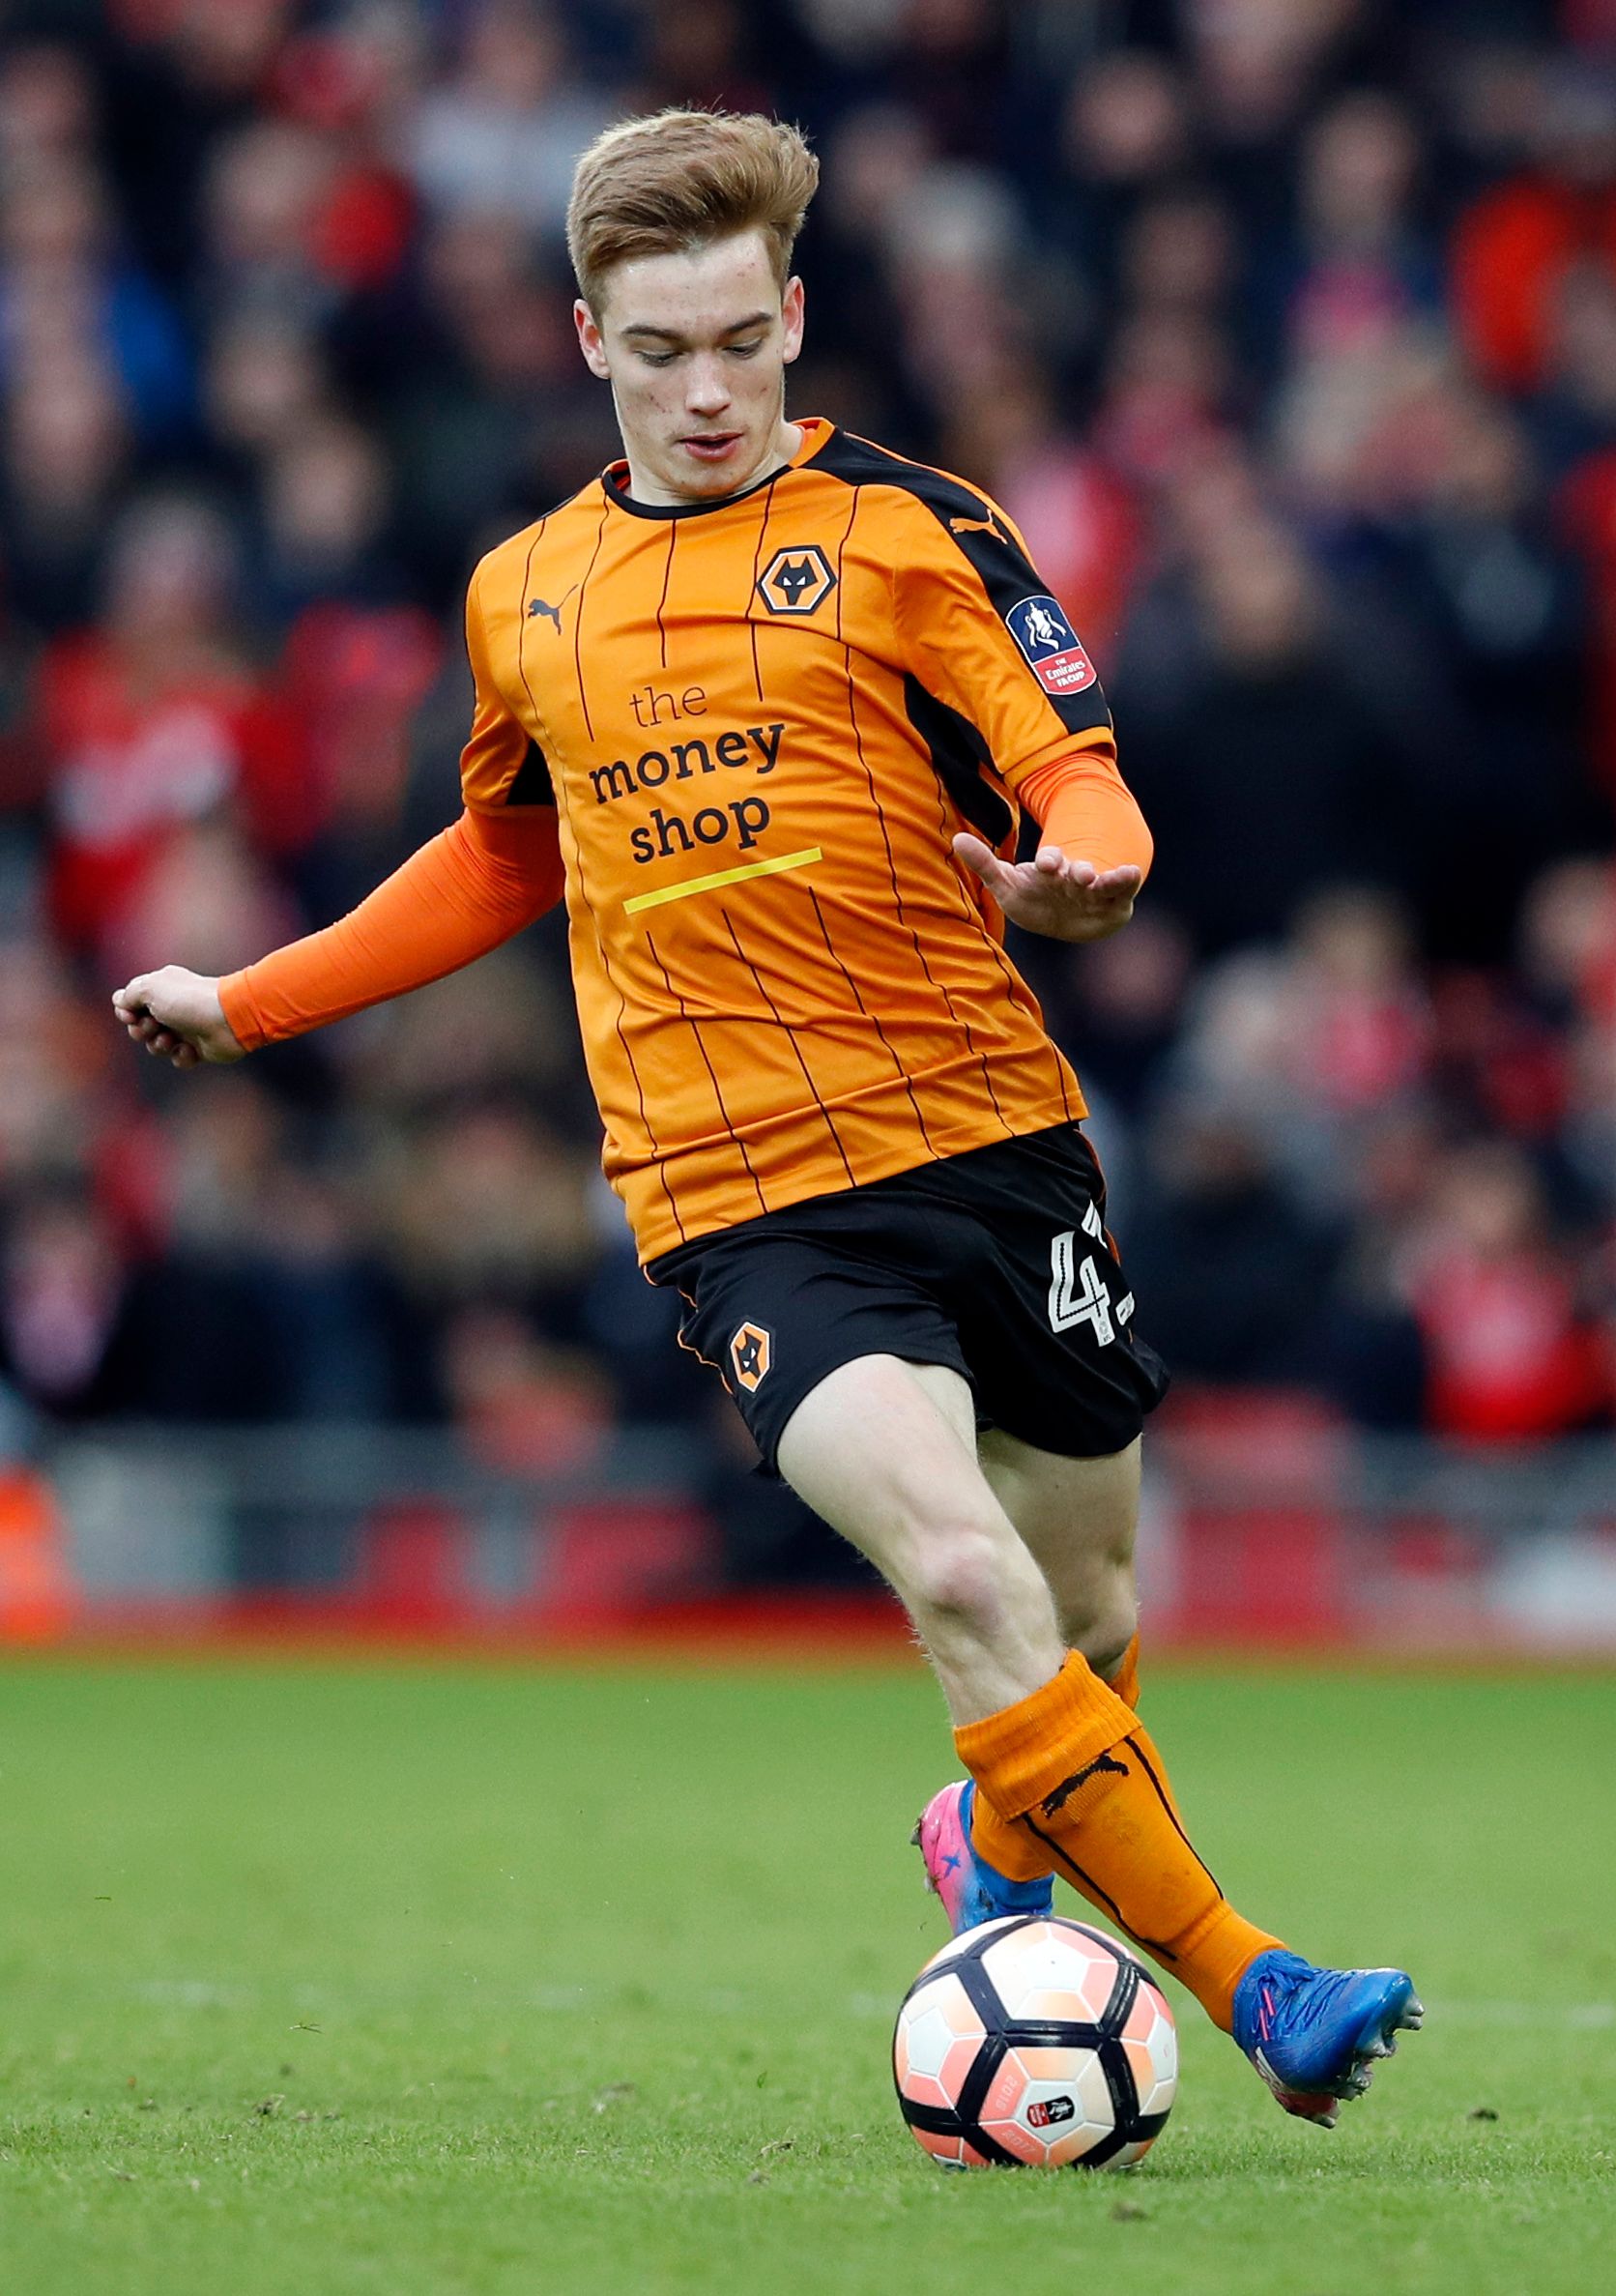 Bruno Lage, Fosun, Jeff Shi, Molineux, The Old Gold, Wolves, Wolves fans, Wolves info, Wolves latest, Wolves news, Wolves updates, WWFC, WWFC news, WWFC update, Premier League, Premier League news, Wolverhampton Wanderers, In the pipeline, Connor Ronan
